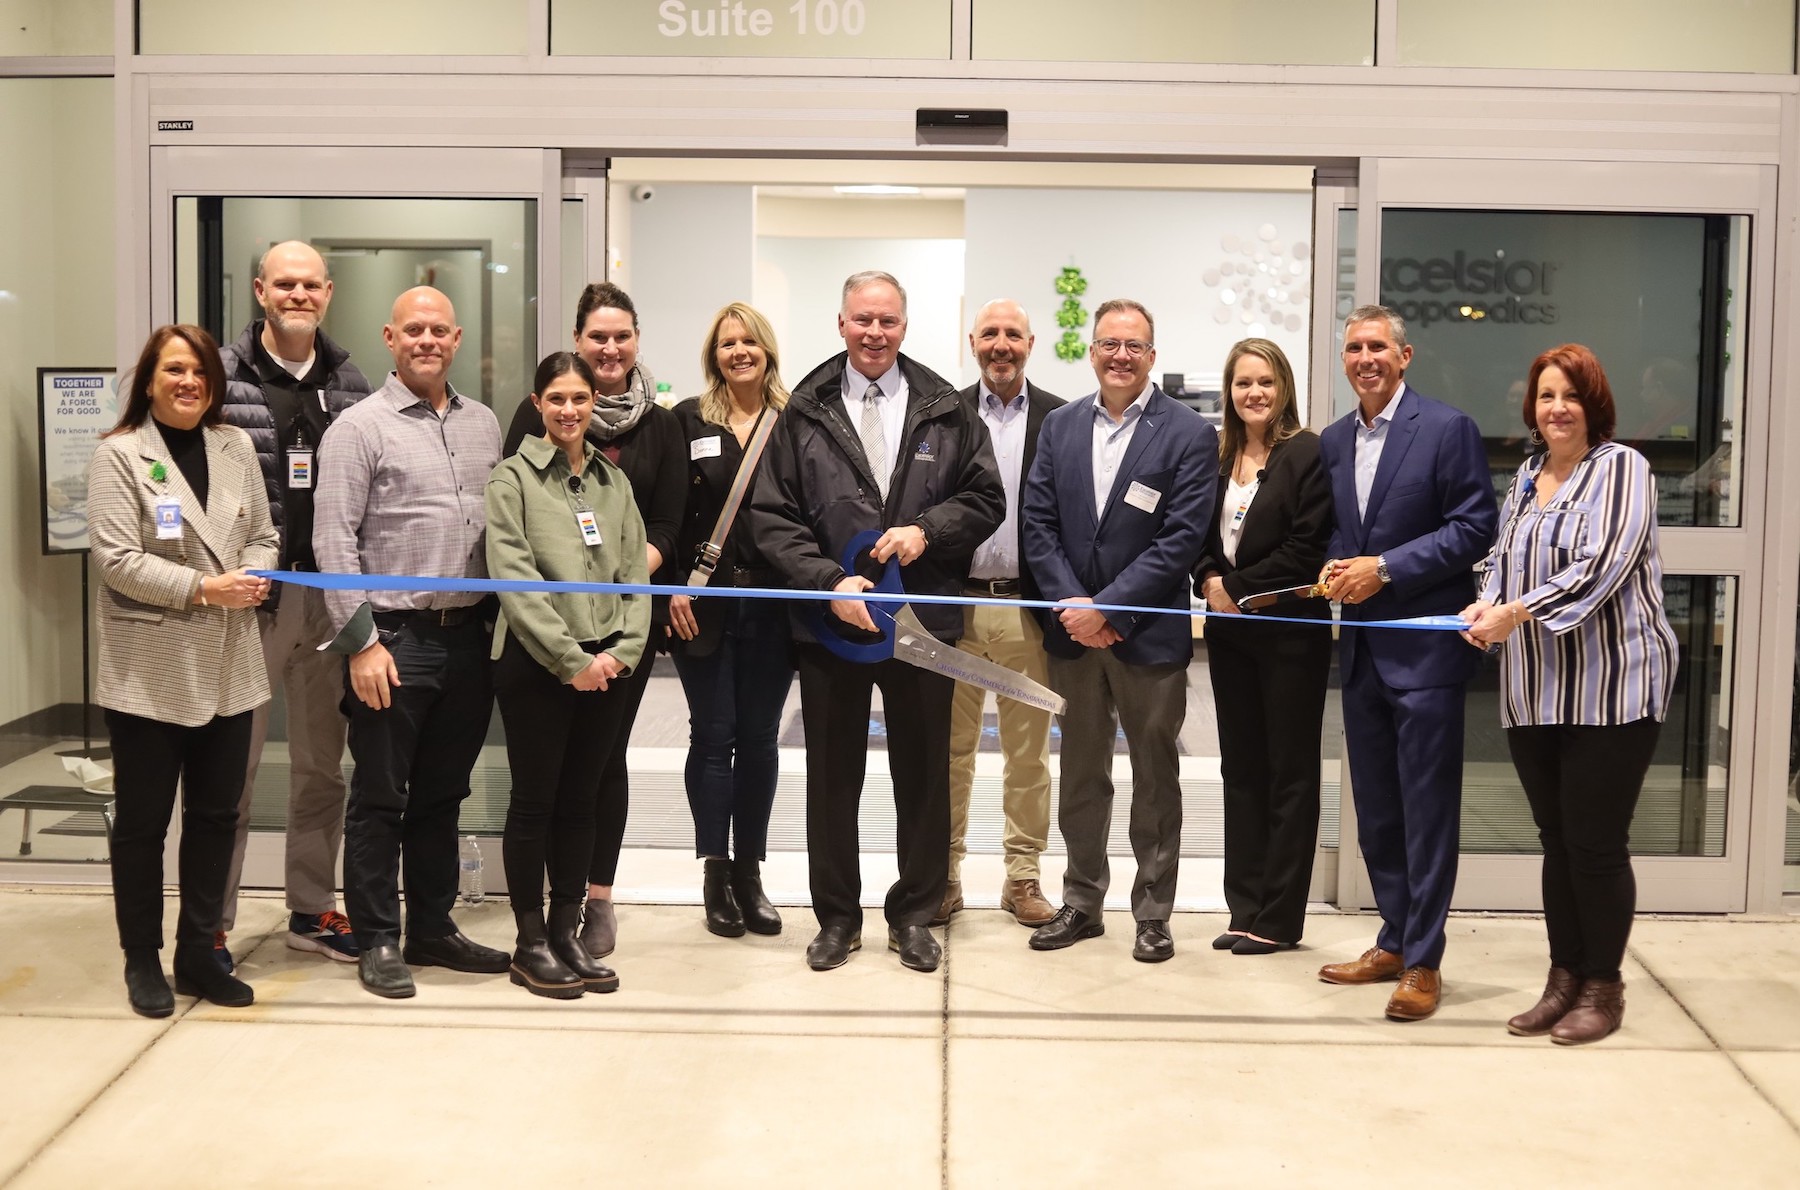 A ribbon was cut Tuesday to officially welcome Excelsior Orthopaedics to its new location at 10195 Niagara Falls Blvd., Suite 100. The new facility has greater capabilities to care for patients. (Photos by Erica Brecher and Elijah Robinson)